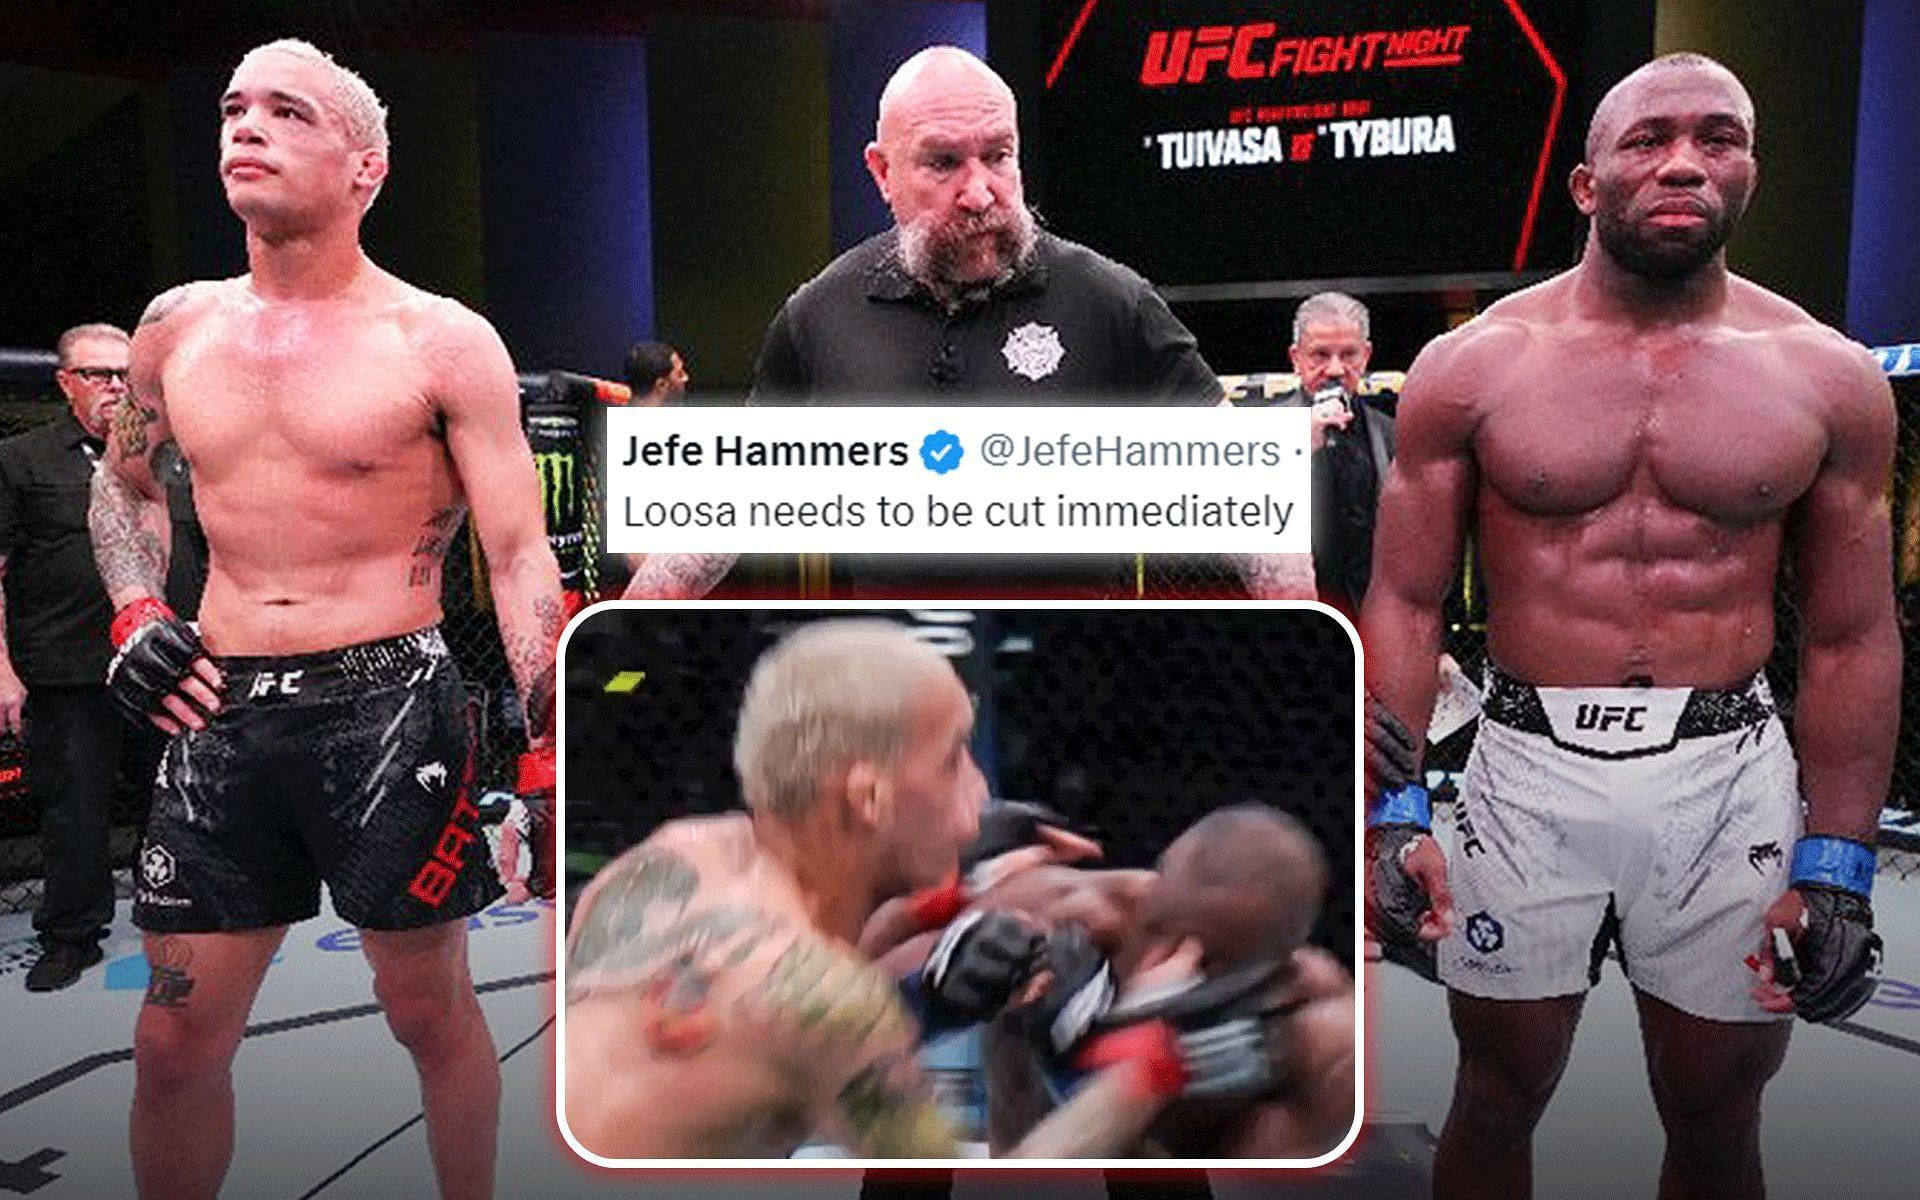 Fans react to the bout between Bryan Battle (left) and Ange Loosa (right) being declared a no contest [Images via: @UFCNews and @UFCEurope on X]